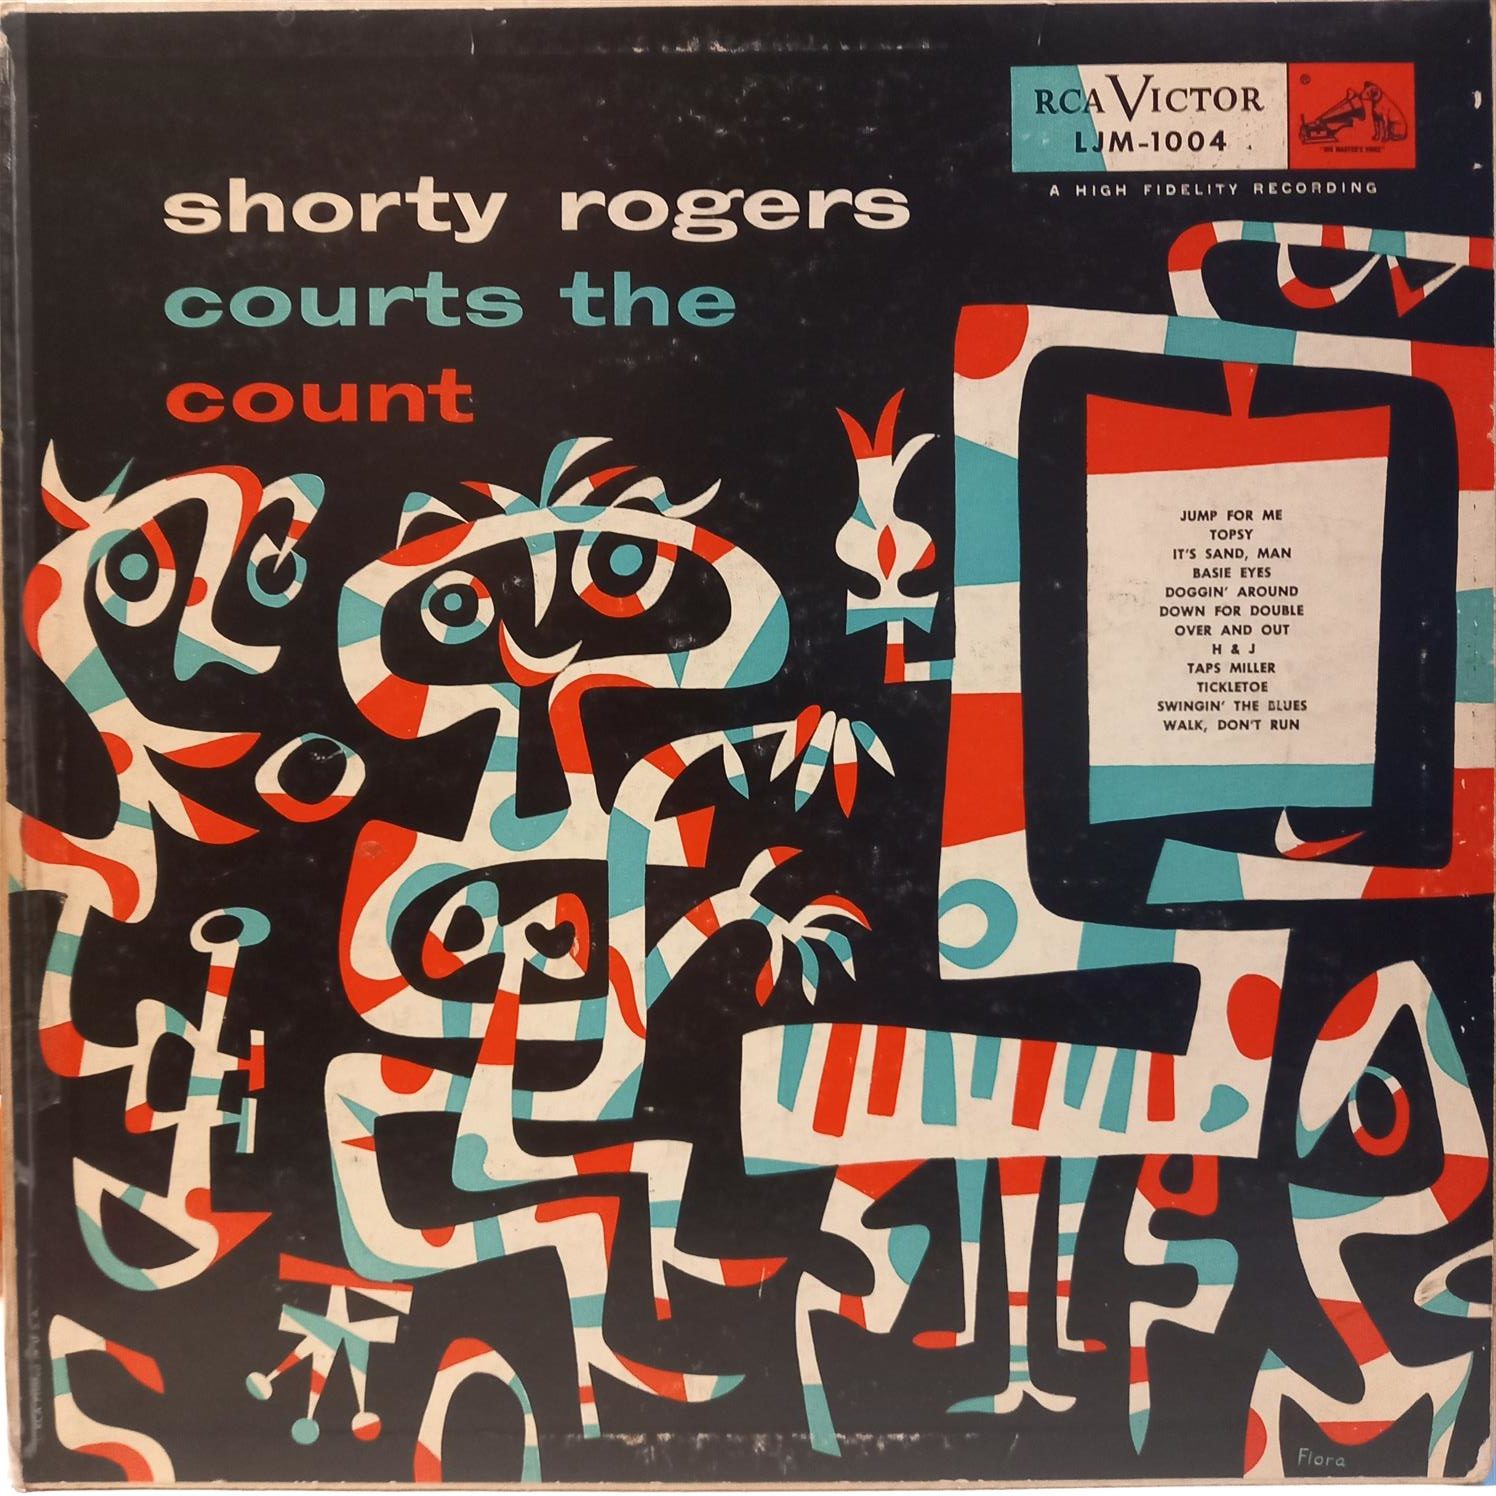 SHORTY ROGERS – SHORTY ROGERS COURTS THE COUNT ON